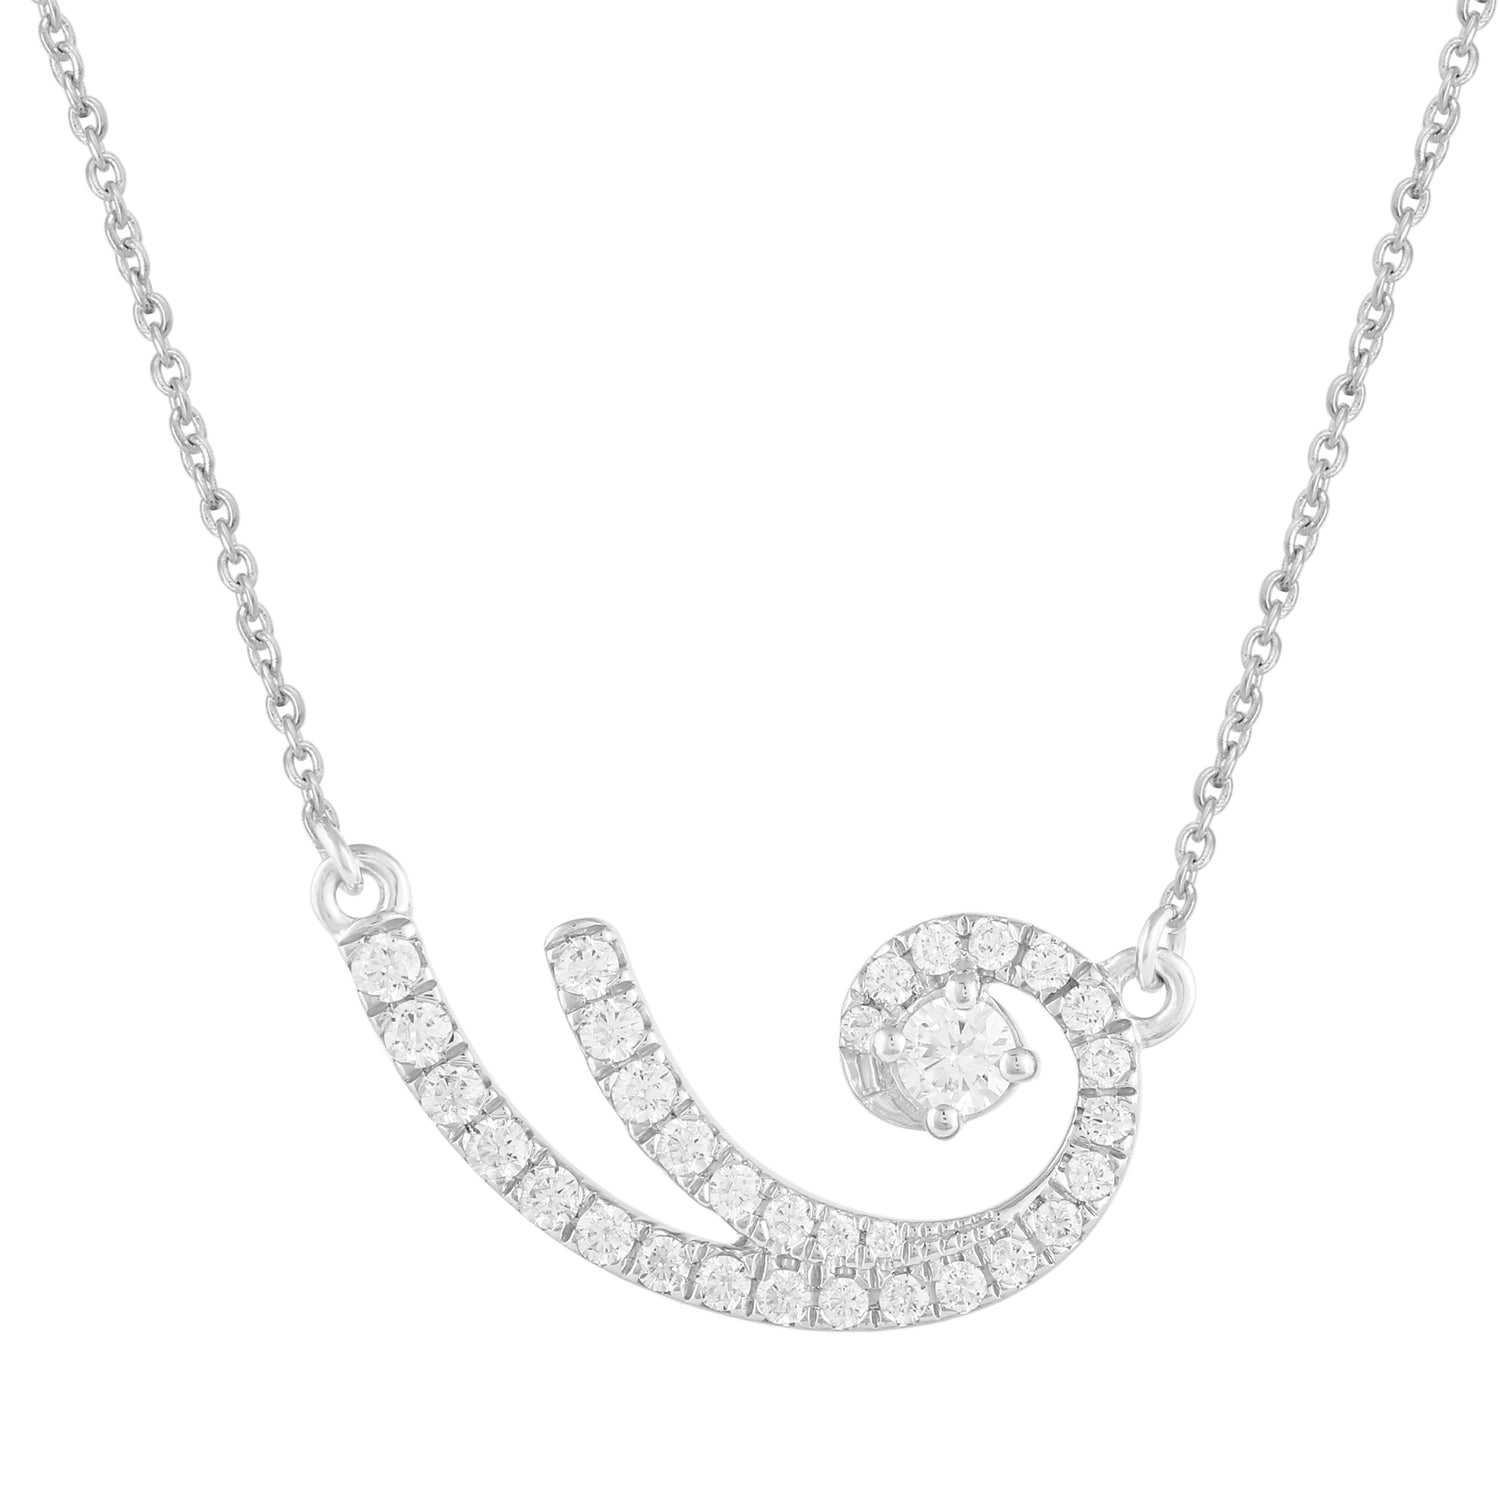 1/3 CT TW Diamond Floating Stone Pave Swirl Pendant Necklace in 925 Sterling Silver